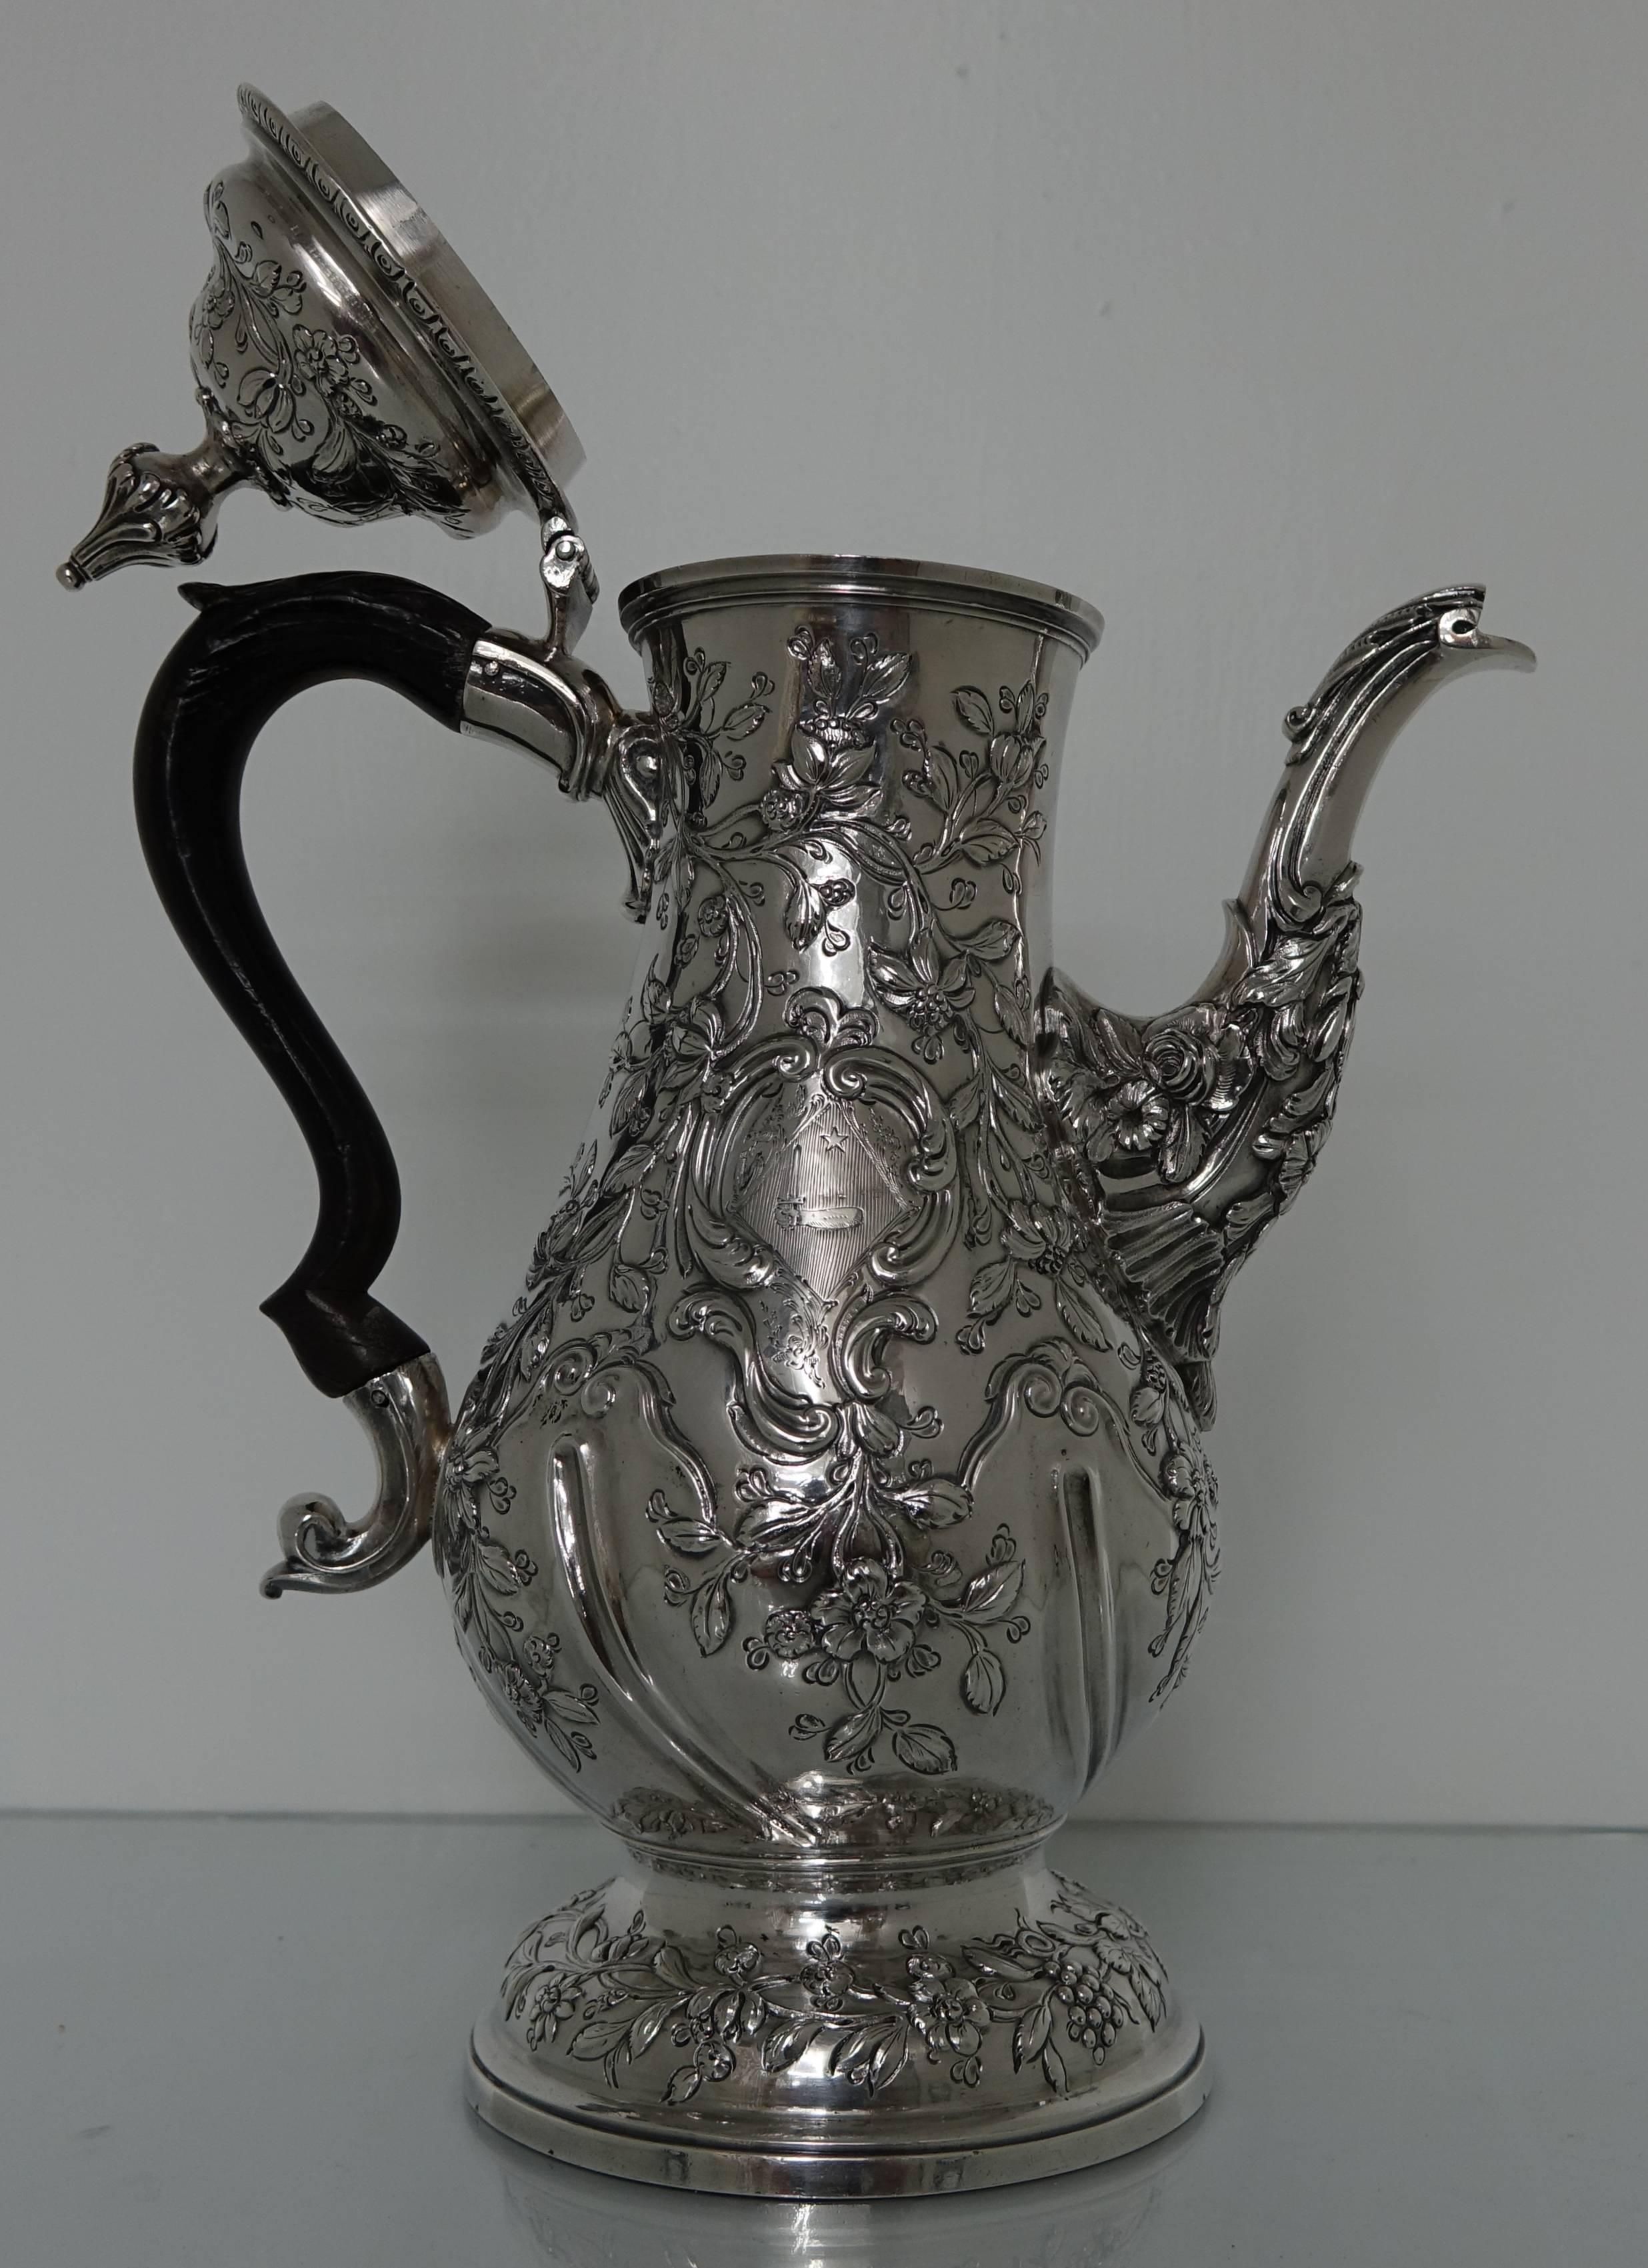 Georgian Silver 18th Century Rococo Coffee Pot London 1769 Charles Wright

A large elegant George III Rococo coffee pot with pristine grape and vine hand chased workmanship throughout with a cartouche incorporating a family crest.  The coffee pot